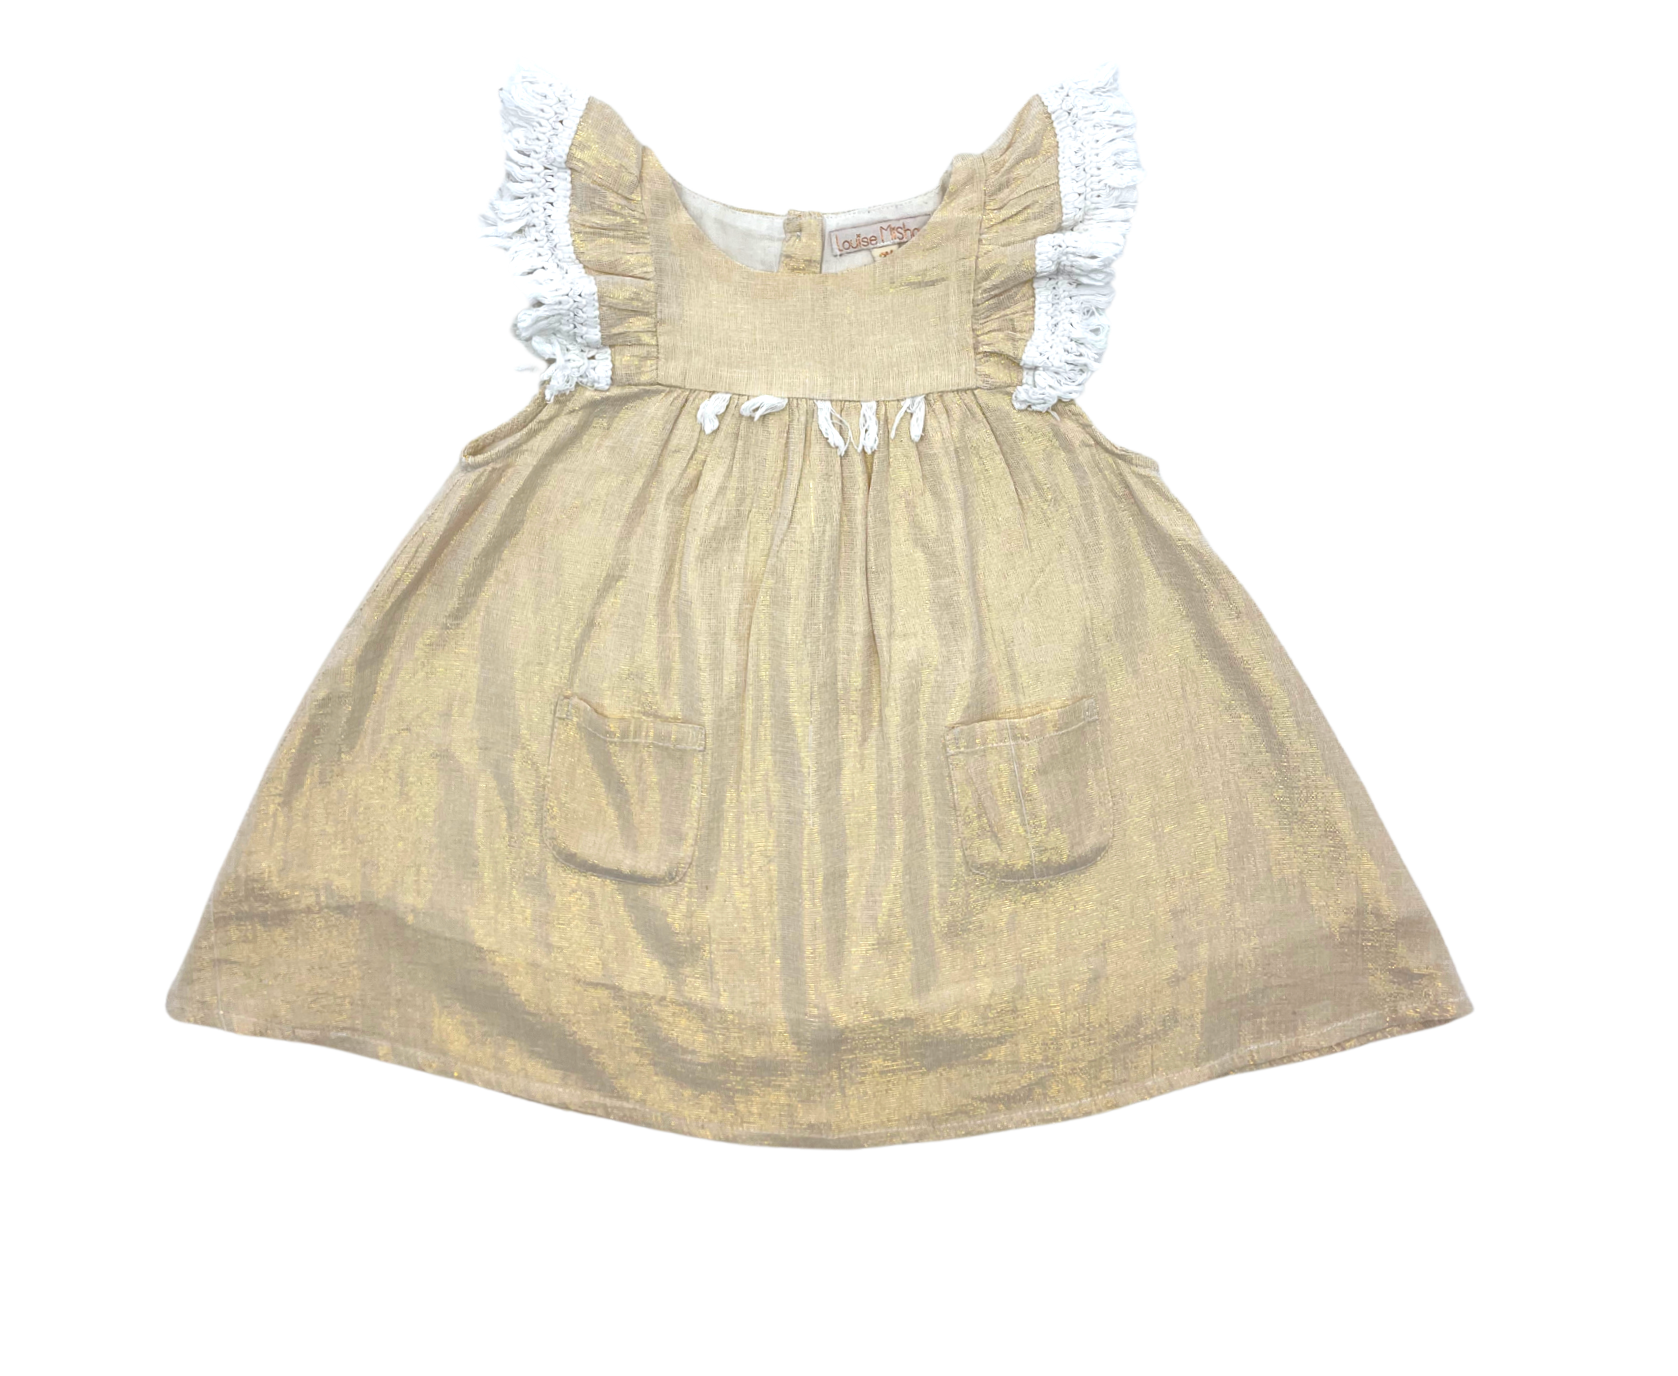 LOUISE MISHA - Golden dress - 2 years old